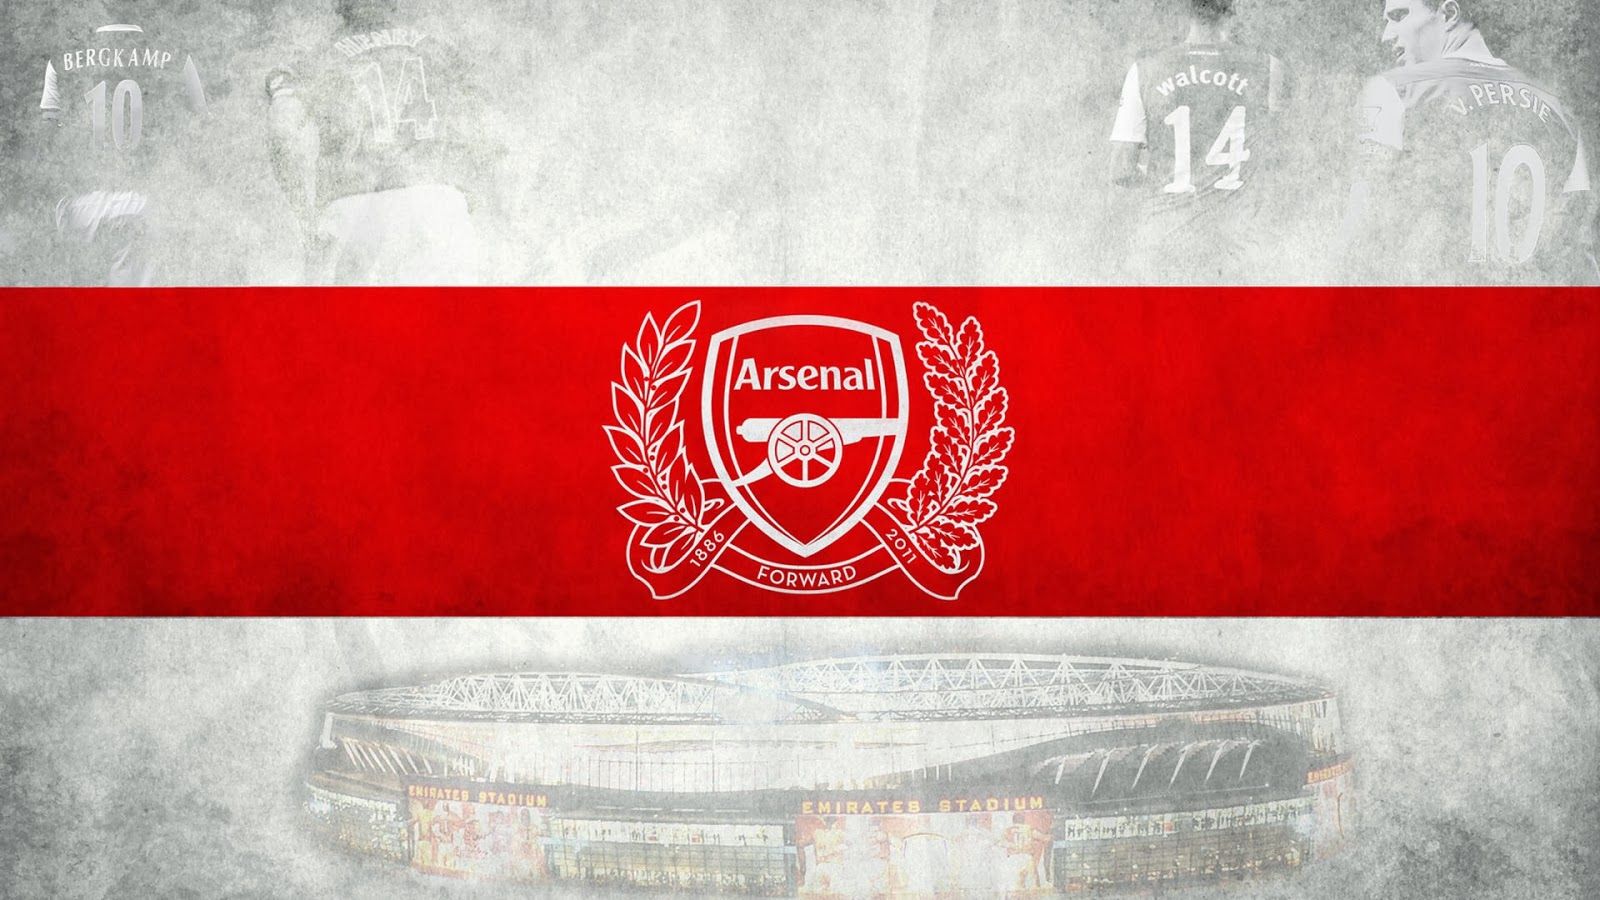 Arsenal Wallpapers HD 2015 Wallpapers, Backgrounds, Images, Art